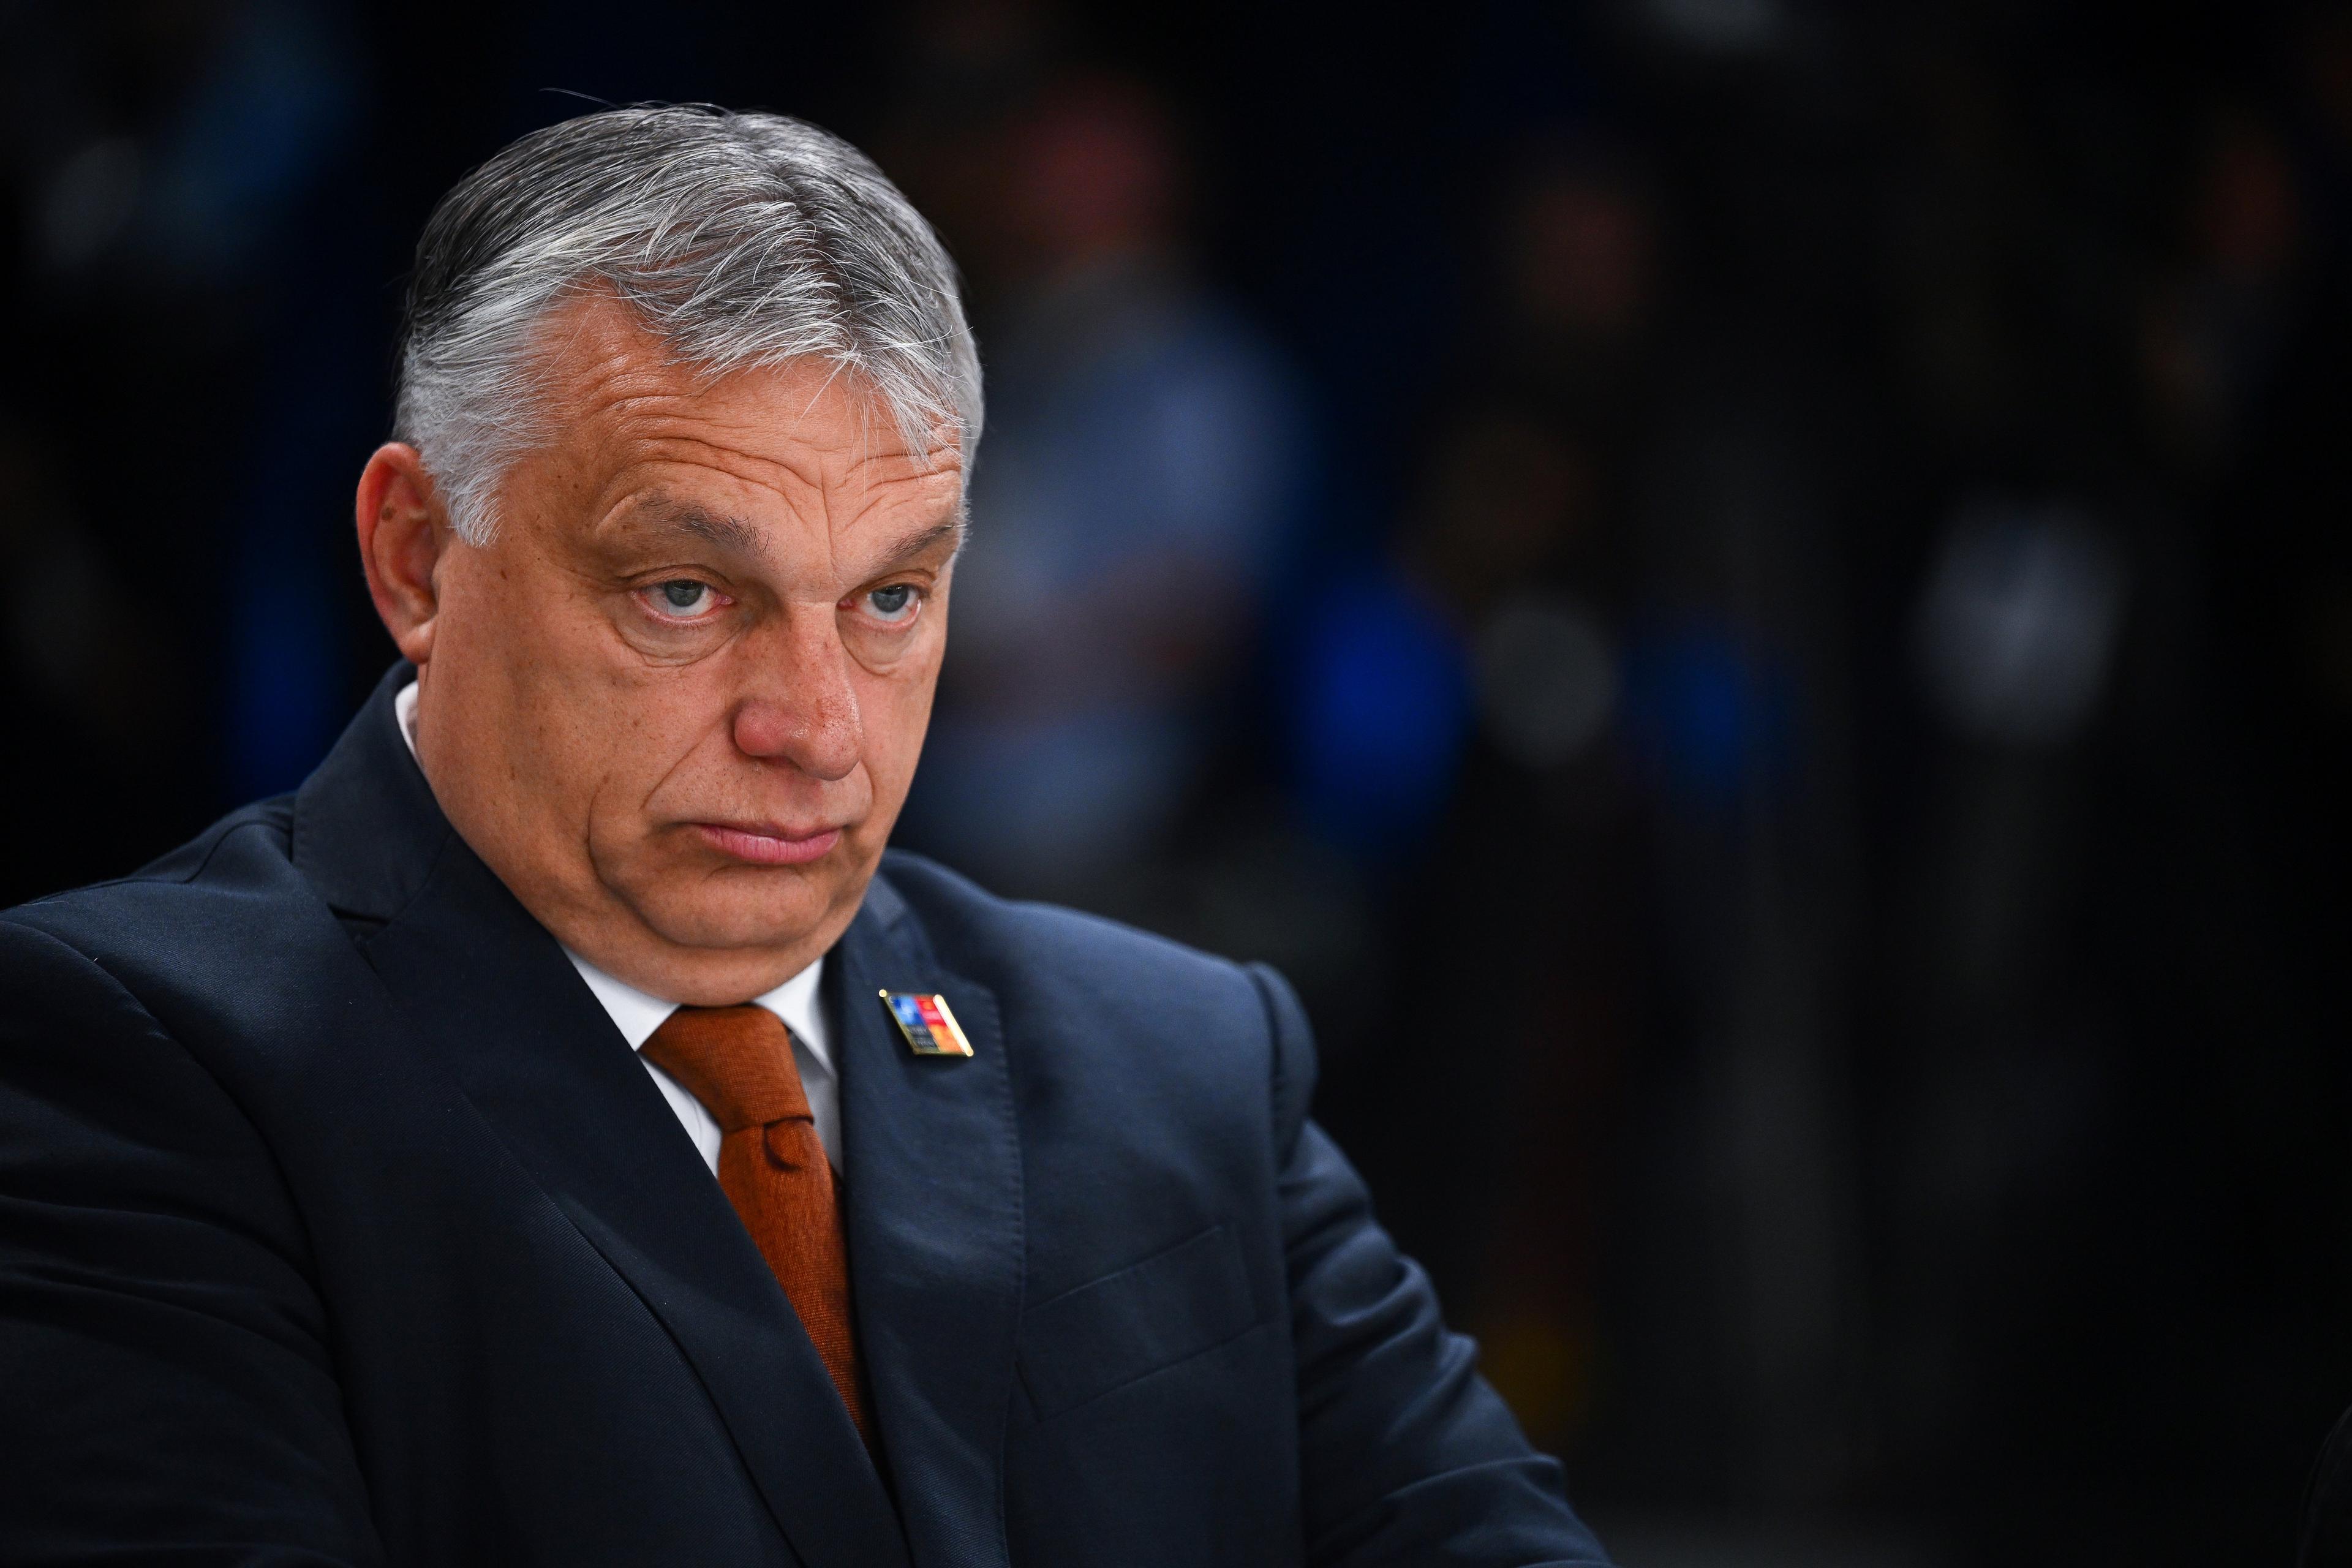 Hungary's Prime Minister Viktor Orban looks on ahead of a meeting of The North Atlantic Council during the NATO summit at the Ifema congress centre in Madrid, on June 30, 2022. (Photo by GABRIEL BOUYS / AFP)